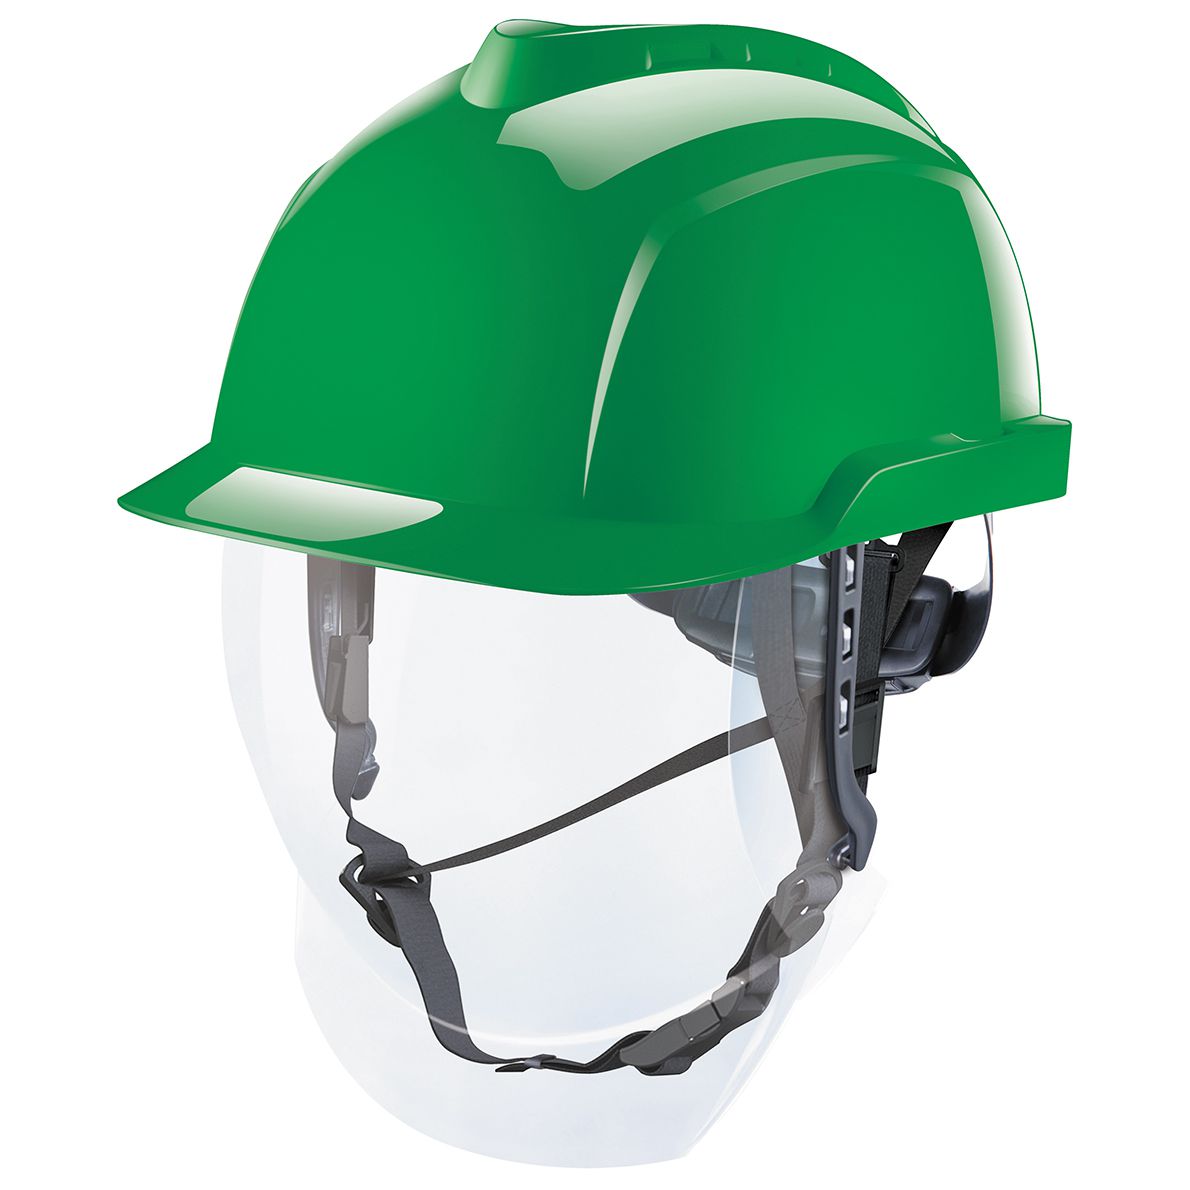 MSA V-Gard 950 unventilated industrial helmet with integrated visor, colour: green